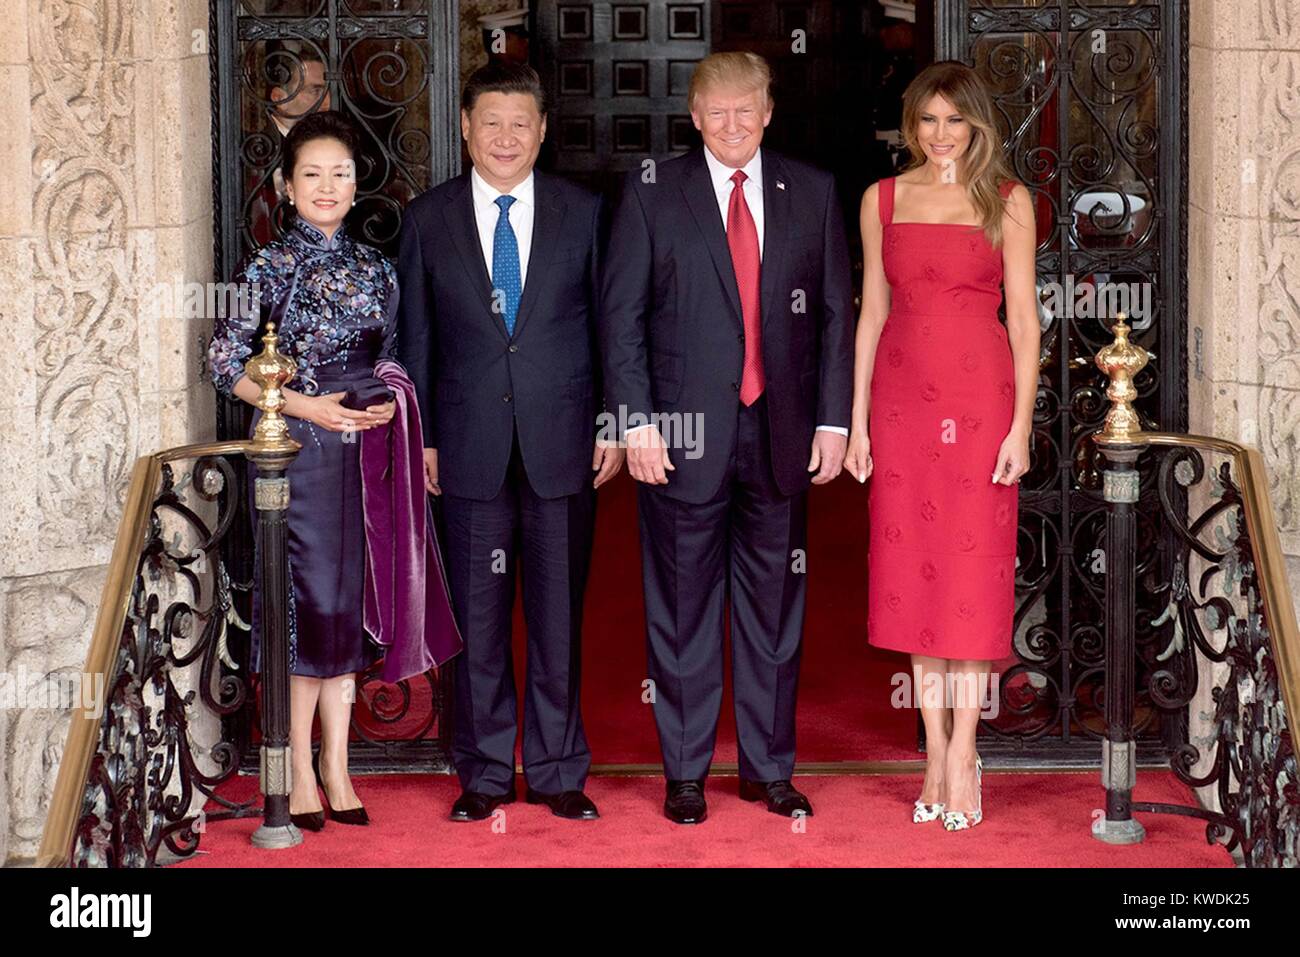 Presidents Donald Trump and Xi Jingping with their wives, Melania Trump and Mrs. Peng Liyuan. Trump and Chinese President Xi had a two-day summit that included discussions over North Korea and trade. On April 6, 2017, they were photographed at the entrance of Mar-a-Lago in Palm Beach, Florida (BSLOC 2017 18 161) Stock Photo